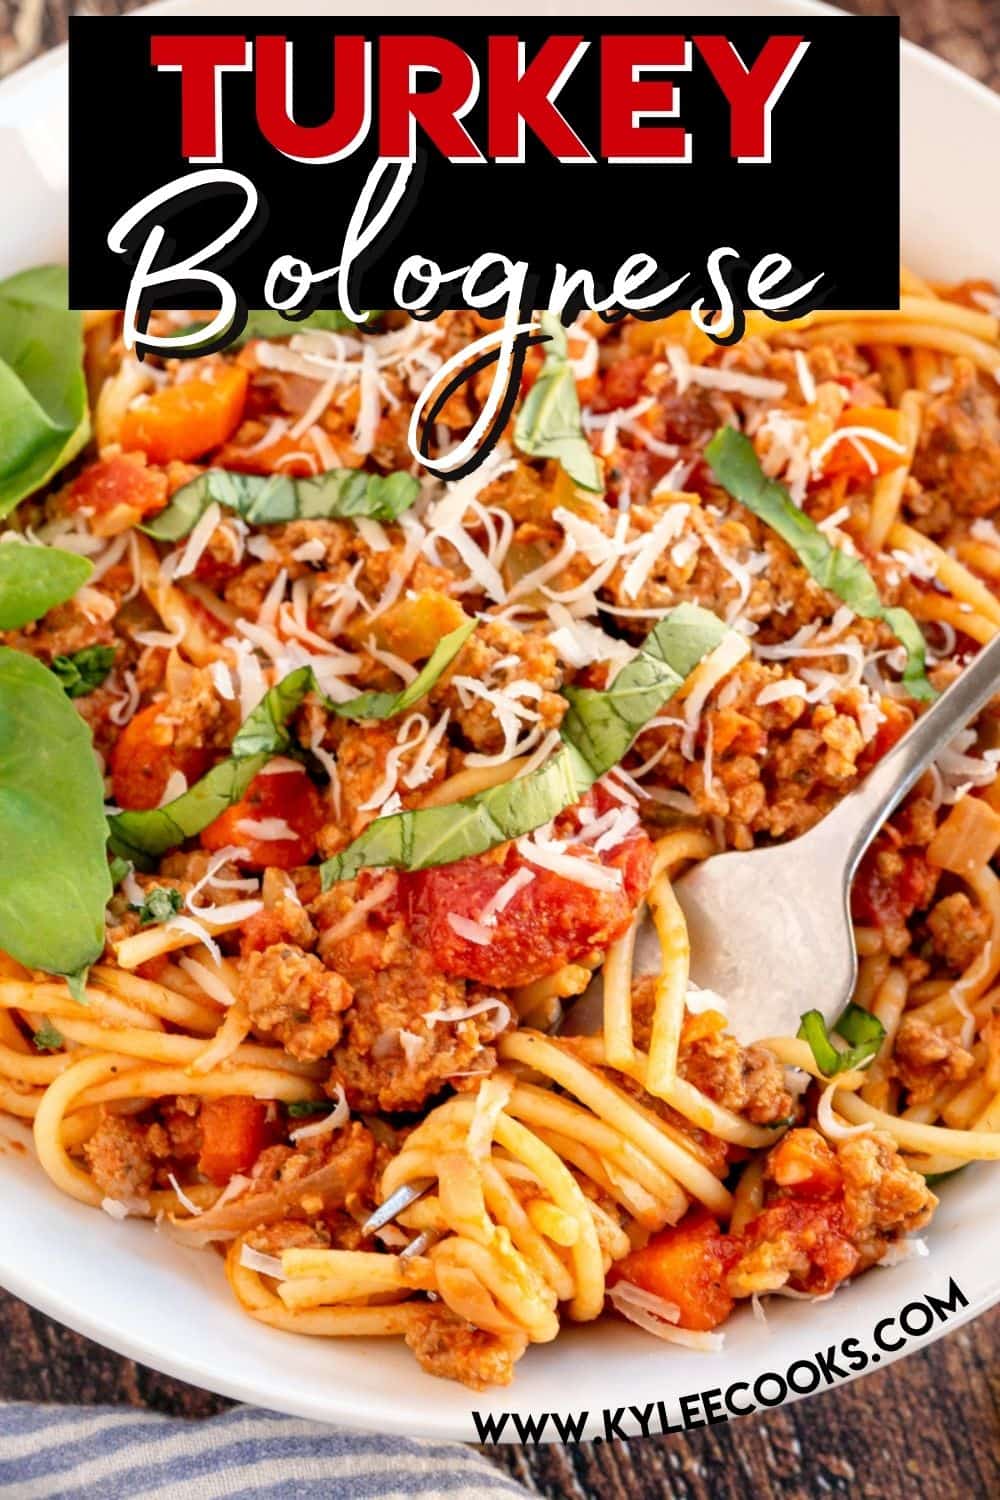 turkey bolognese with recipe title overlaid in text